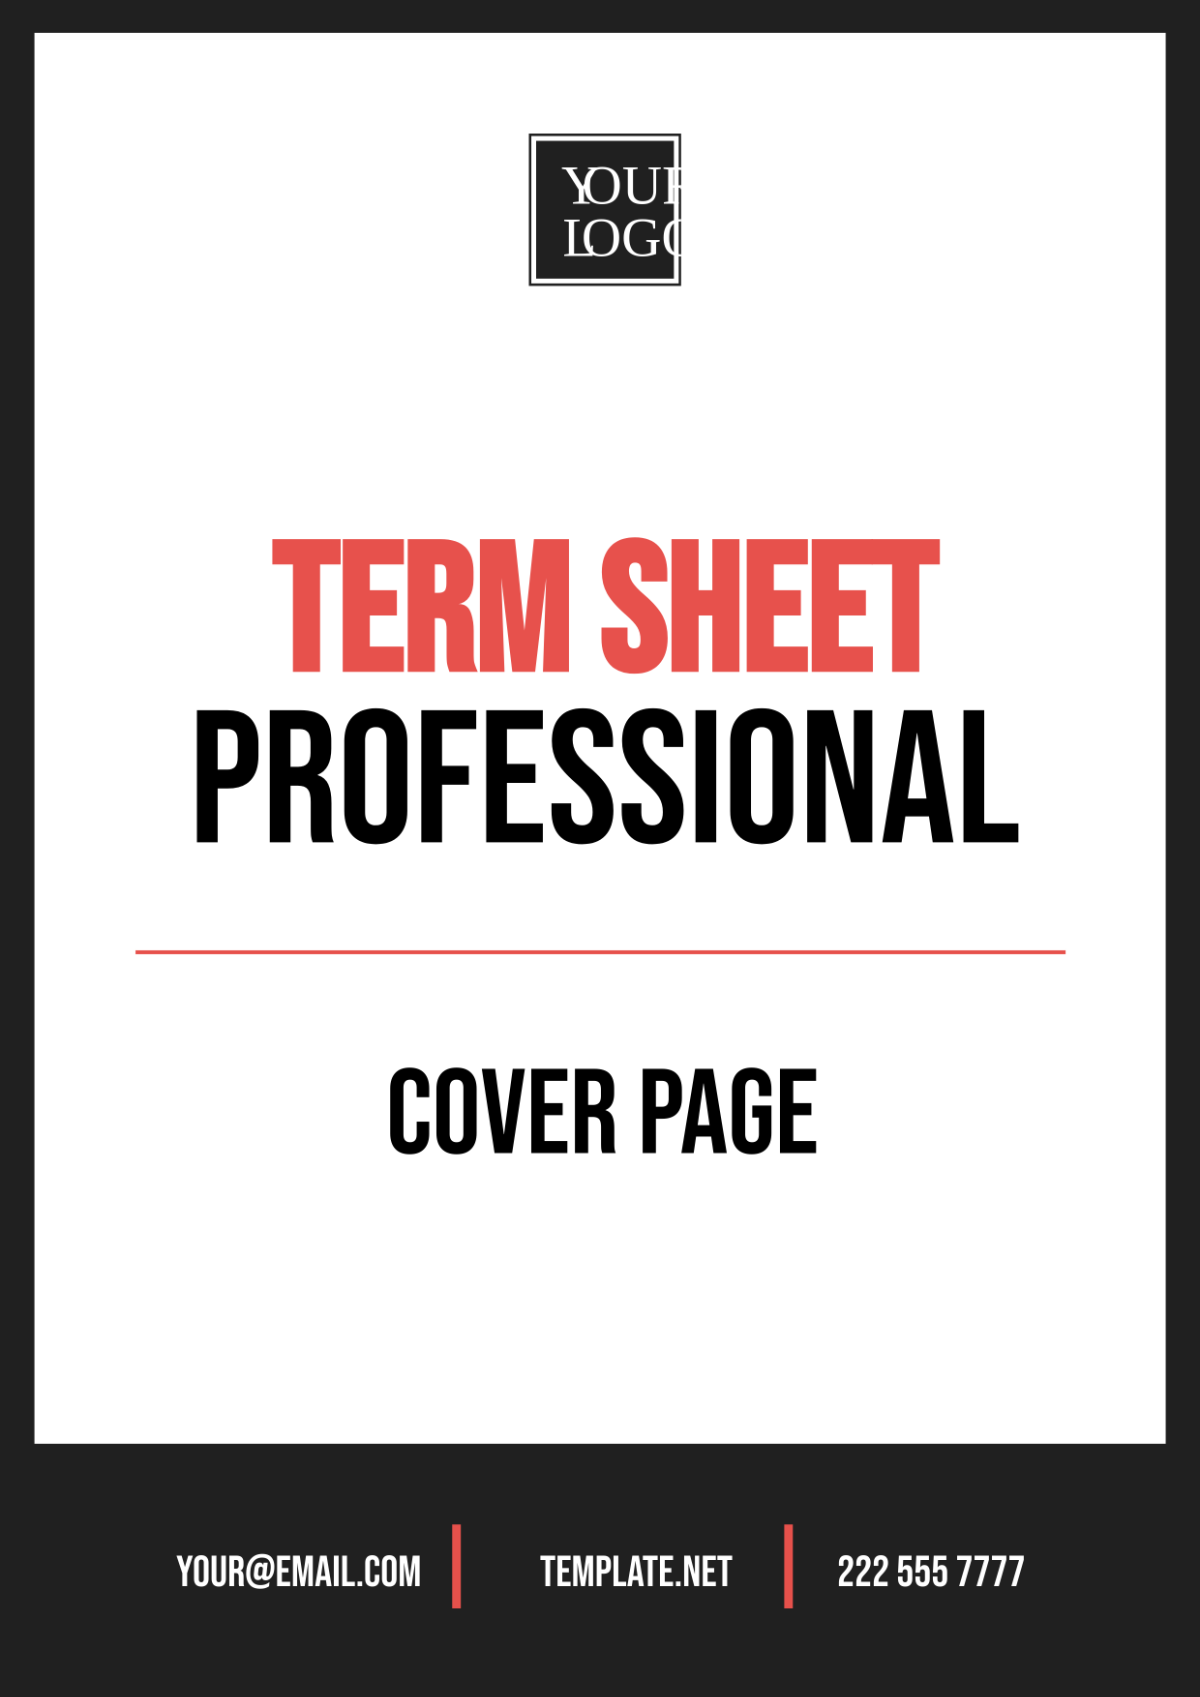 Term Sheet Professional Cover Page Template